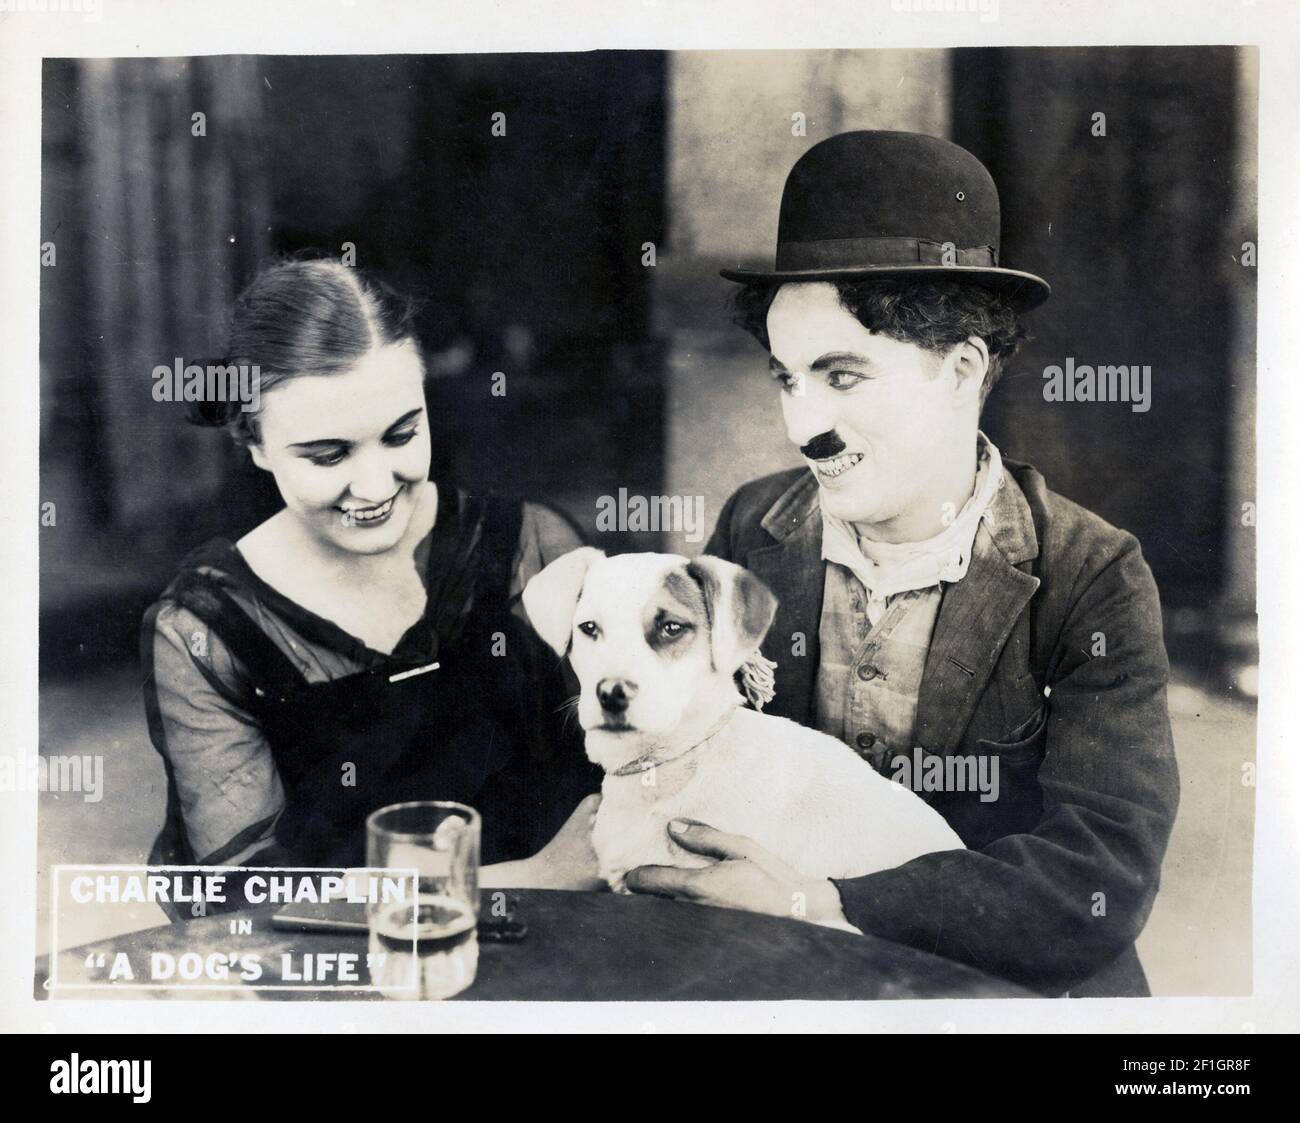 Charlie Chaplin photo from the movie A Dog's Life. 1918. Stock Photo